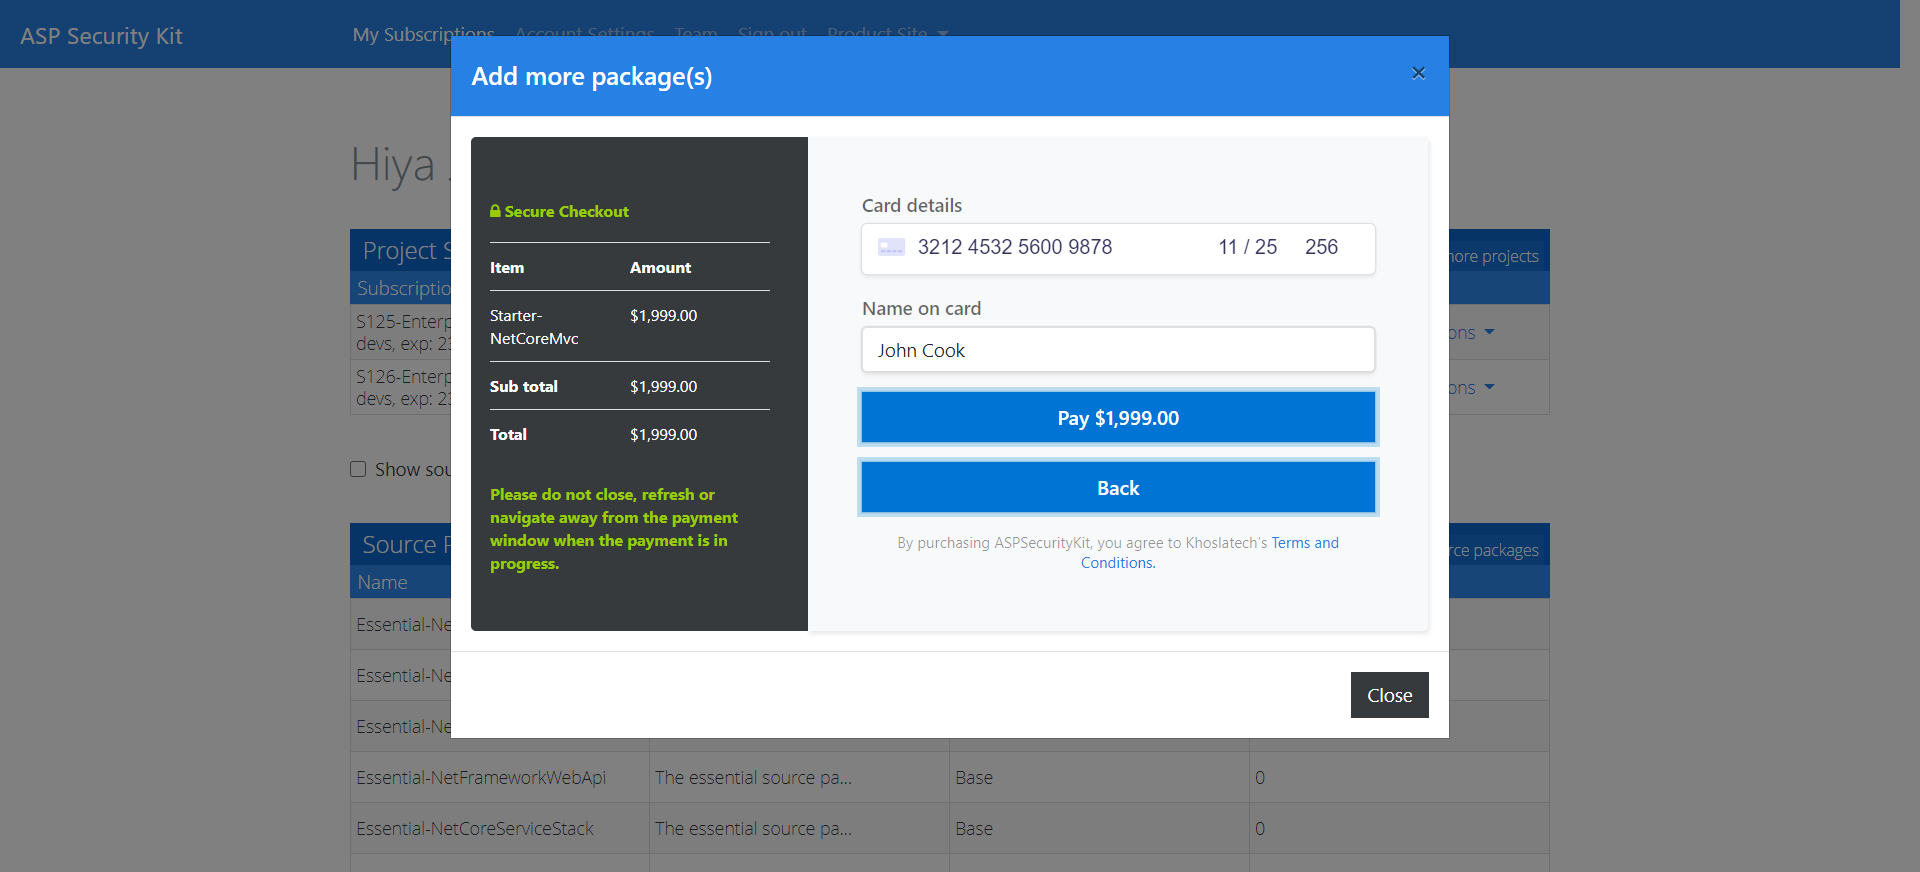 Add more source packages payment details popup